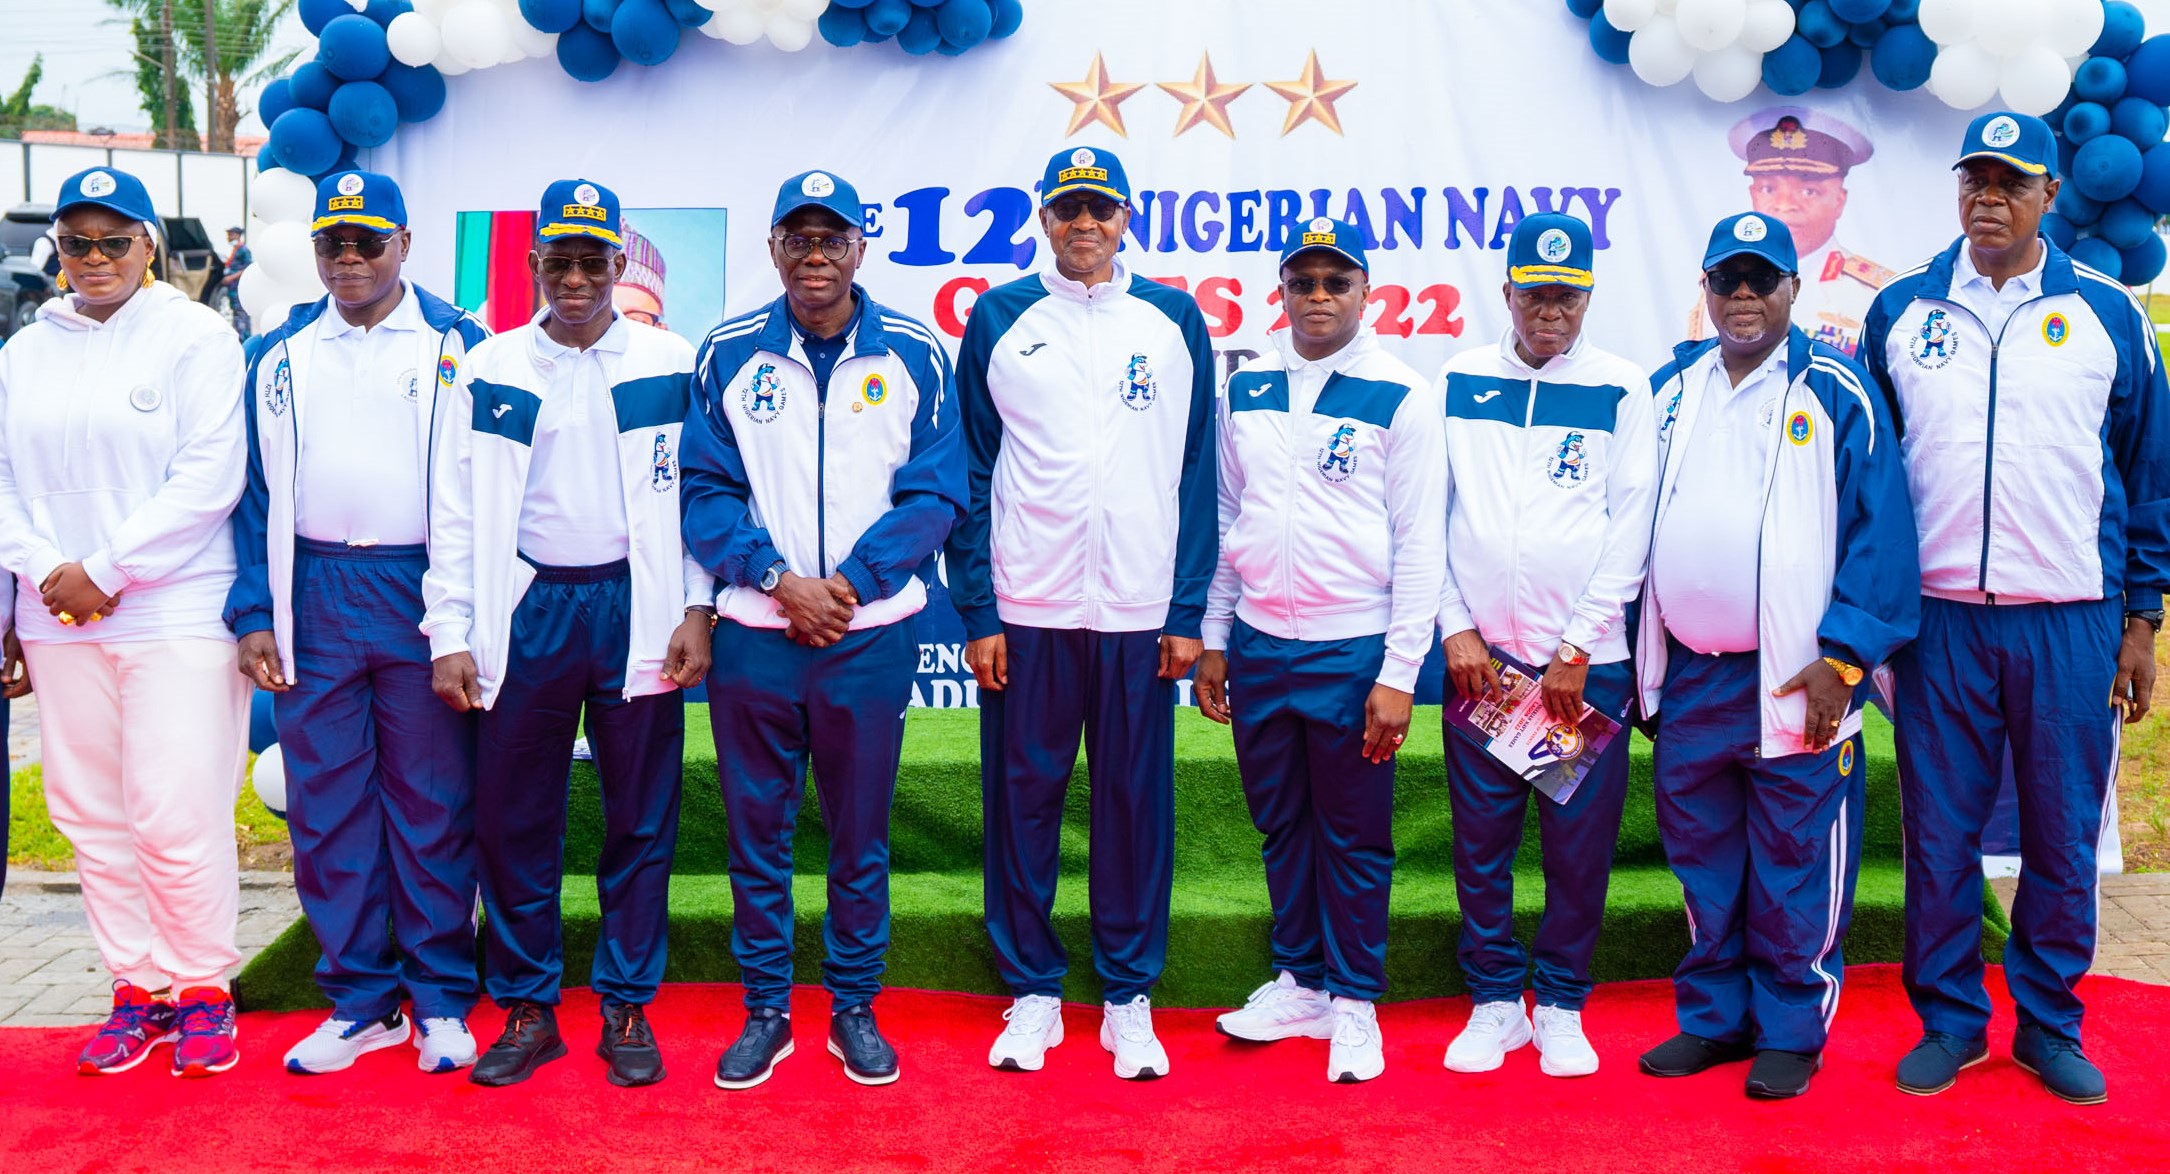  Buhari, Sanwo-Olu At The Formal Commissioning Of Nigerian Navy Sports Complex And Opening Ceremony Of The 12th Nigerian Navy Games In Lagos